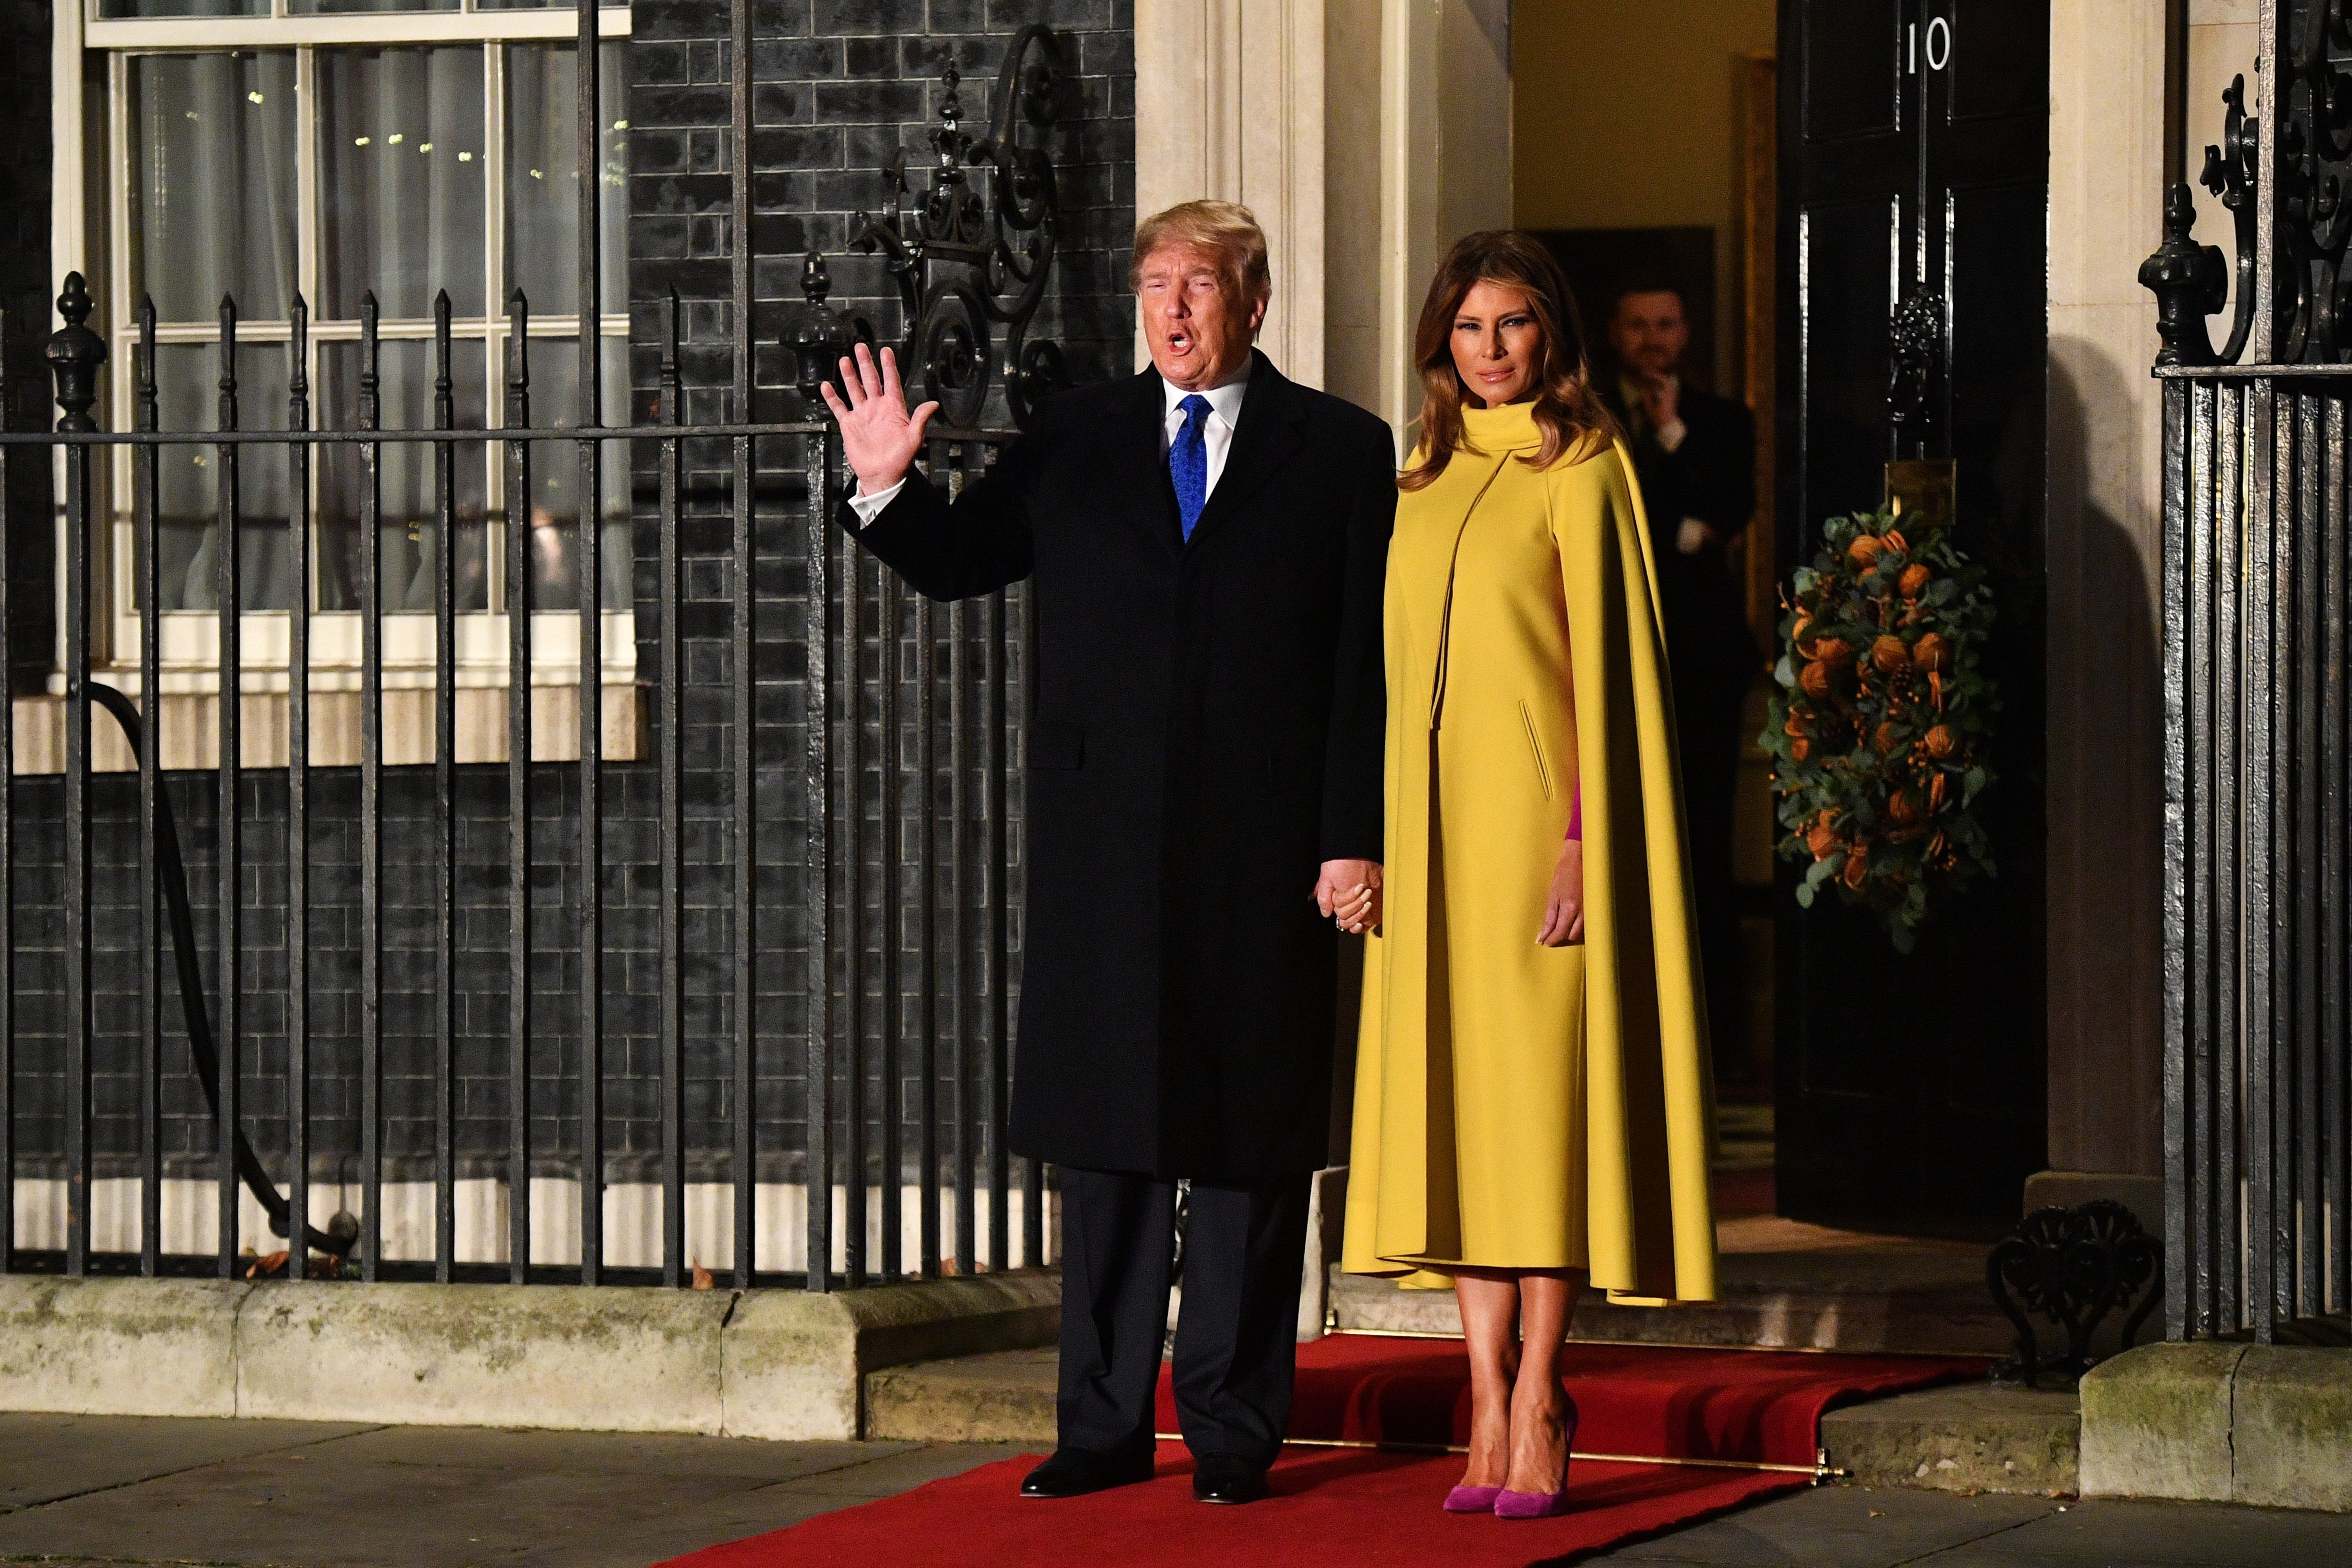 Donald Trump and Melania Trump attend the NATO Summit in London, England on December 3, 2019 | Photo: Getty Images